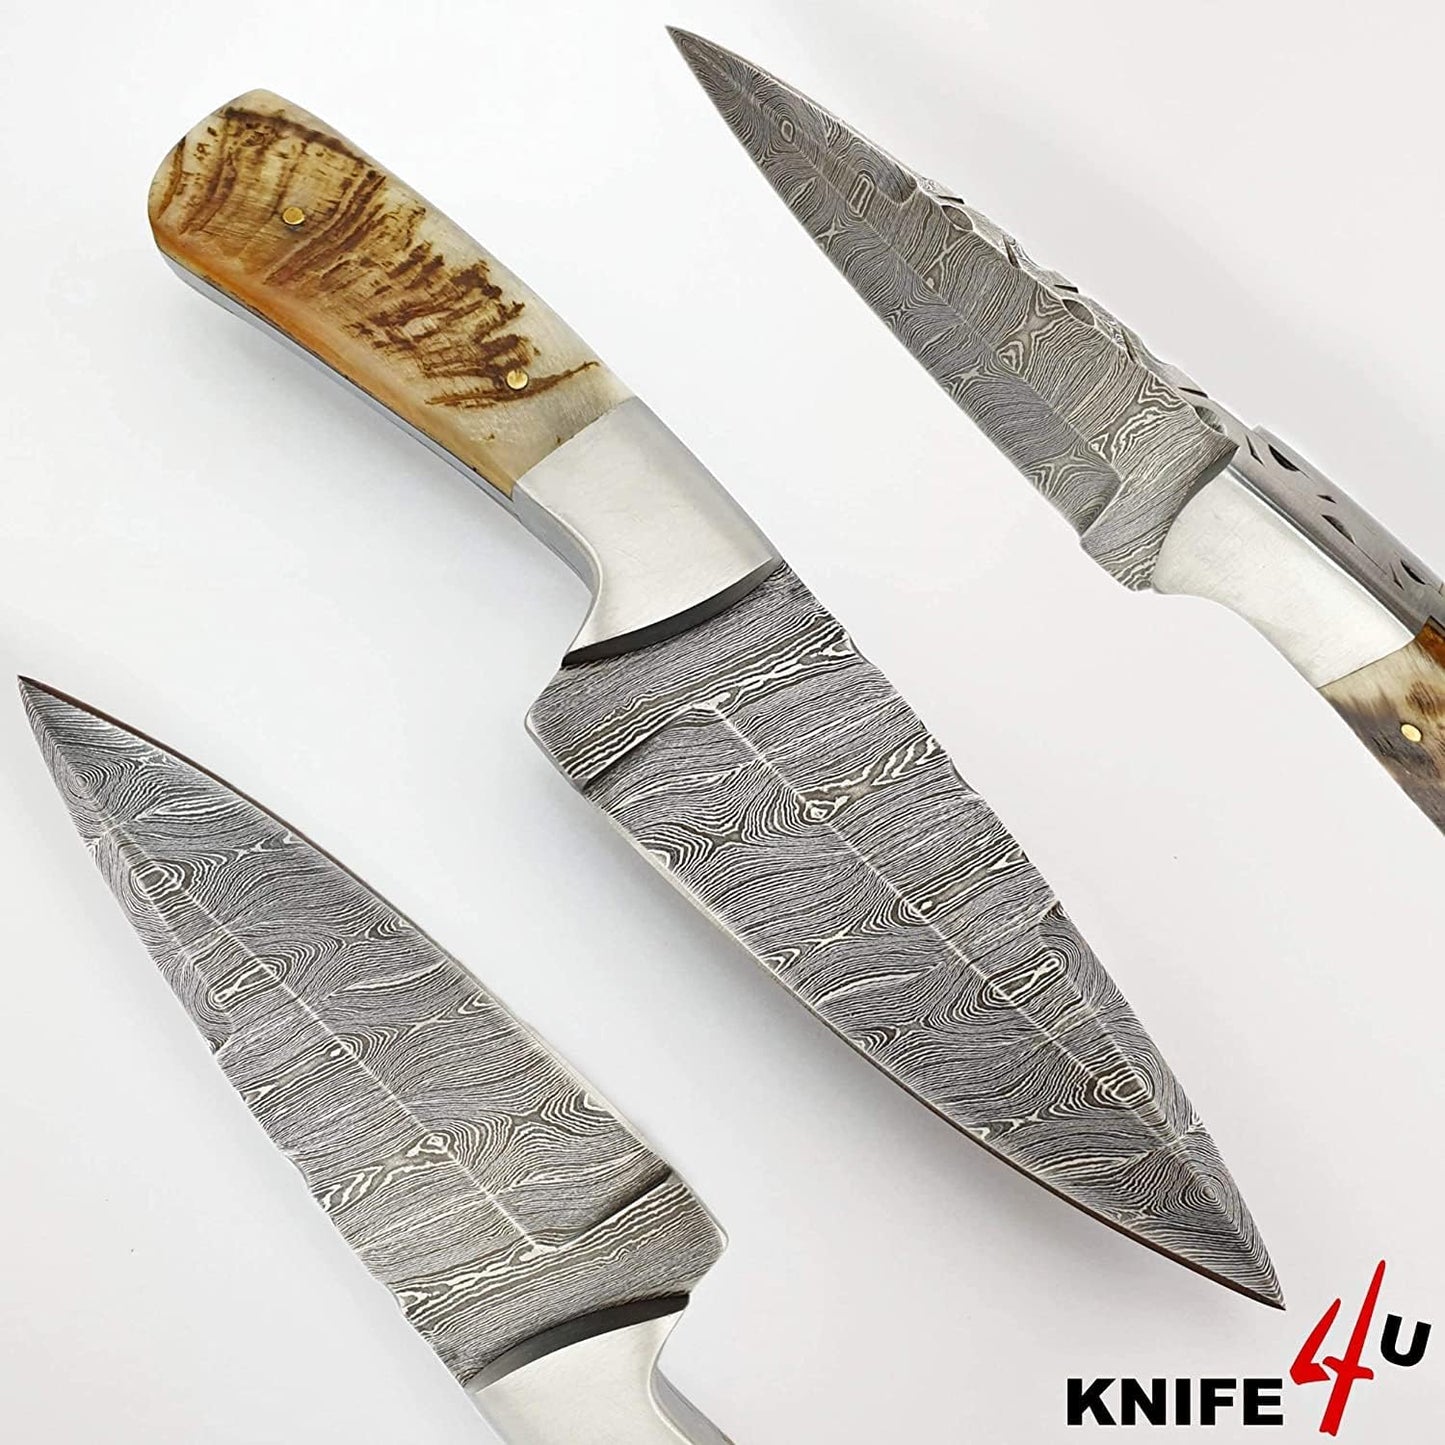 KD Hunting Knife 8" Damascus Steel with Sheath for Camping Outdoor